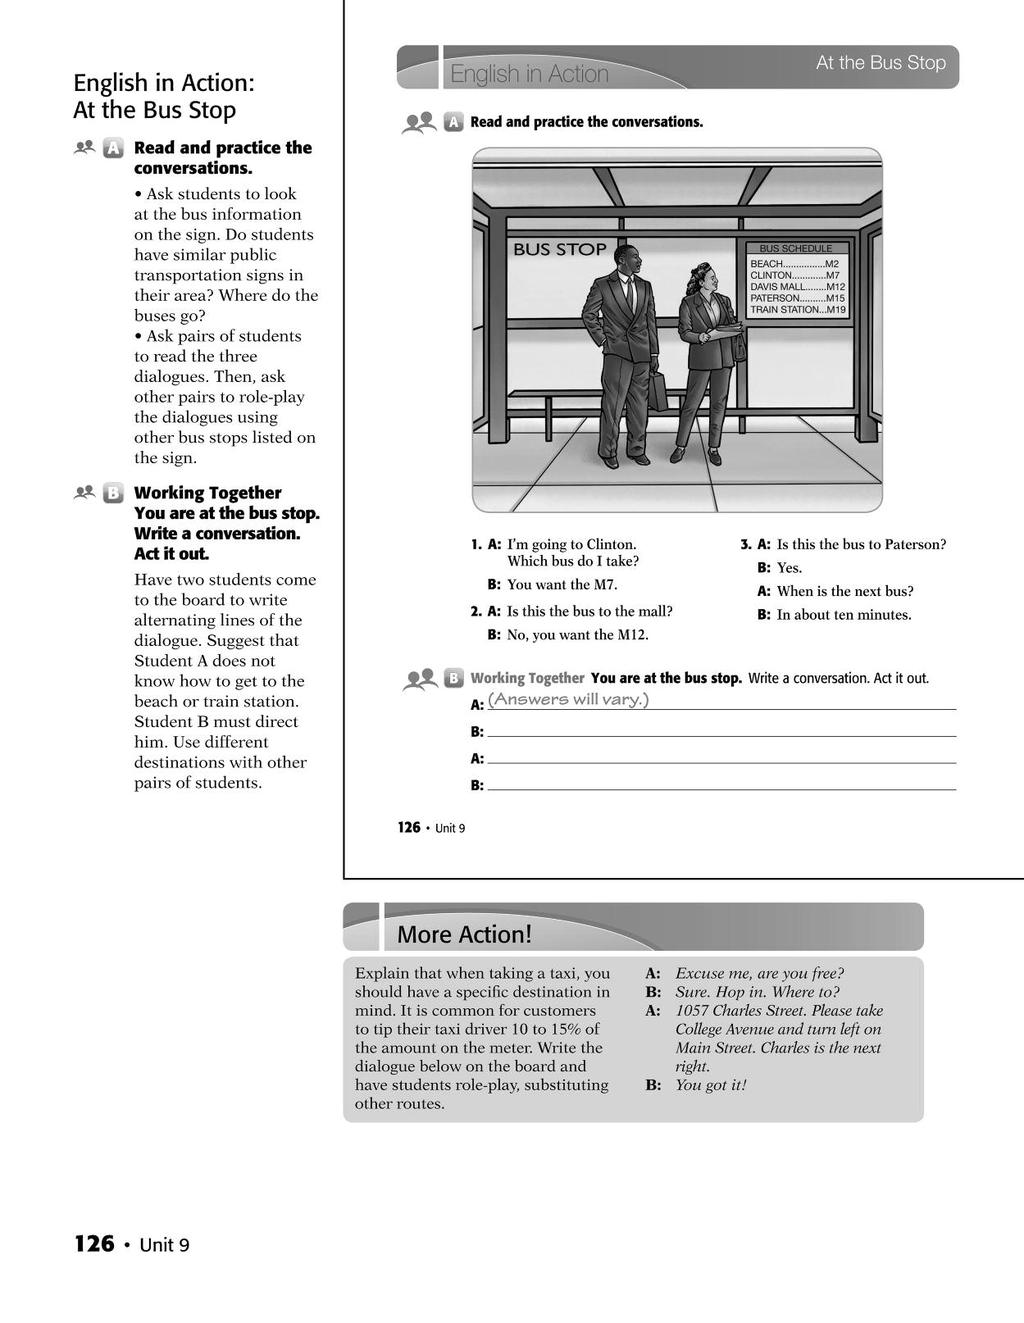 22 Sample pages from English in Action, Second Edition